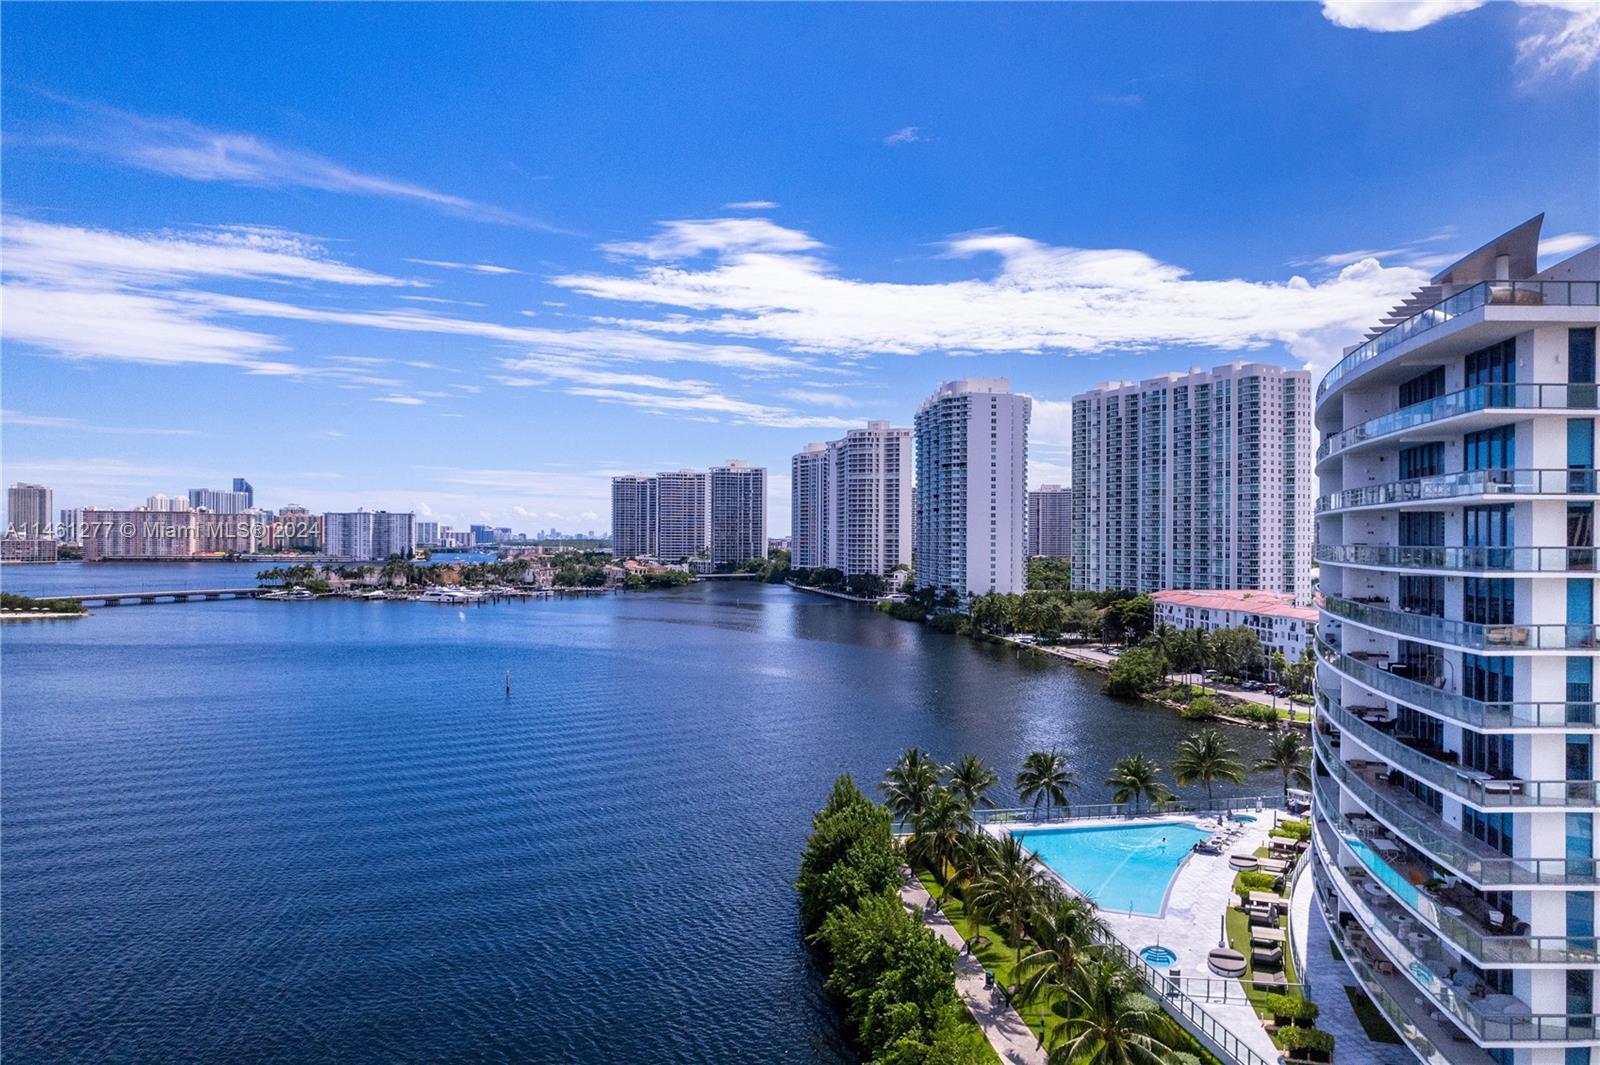 Experience luxury in this 3-bedroom unit at Echo Aventura with a versatile den, plus service quarter